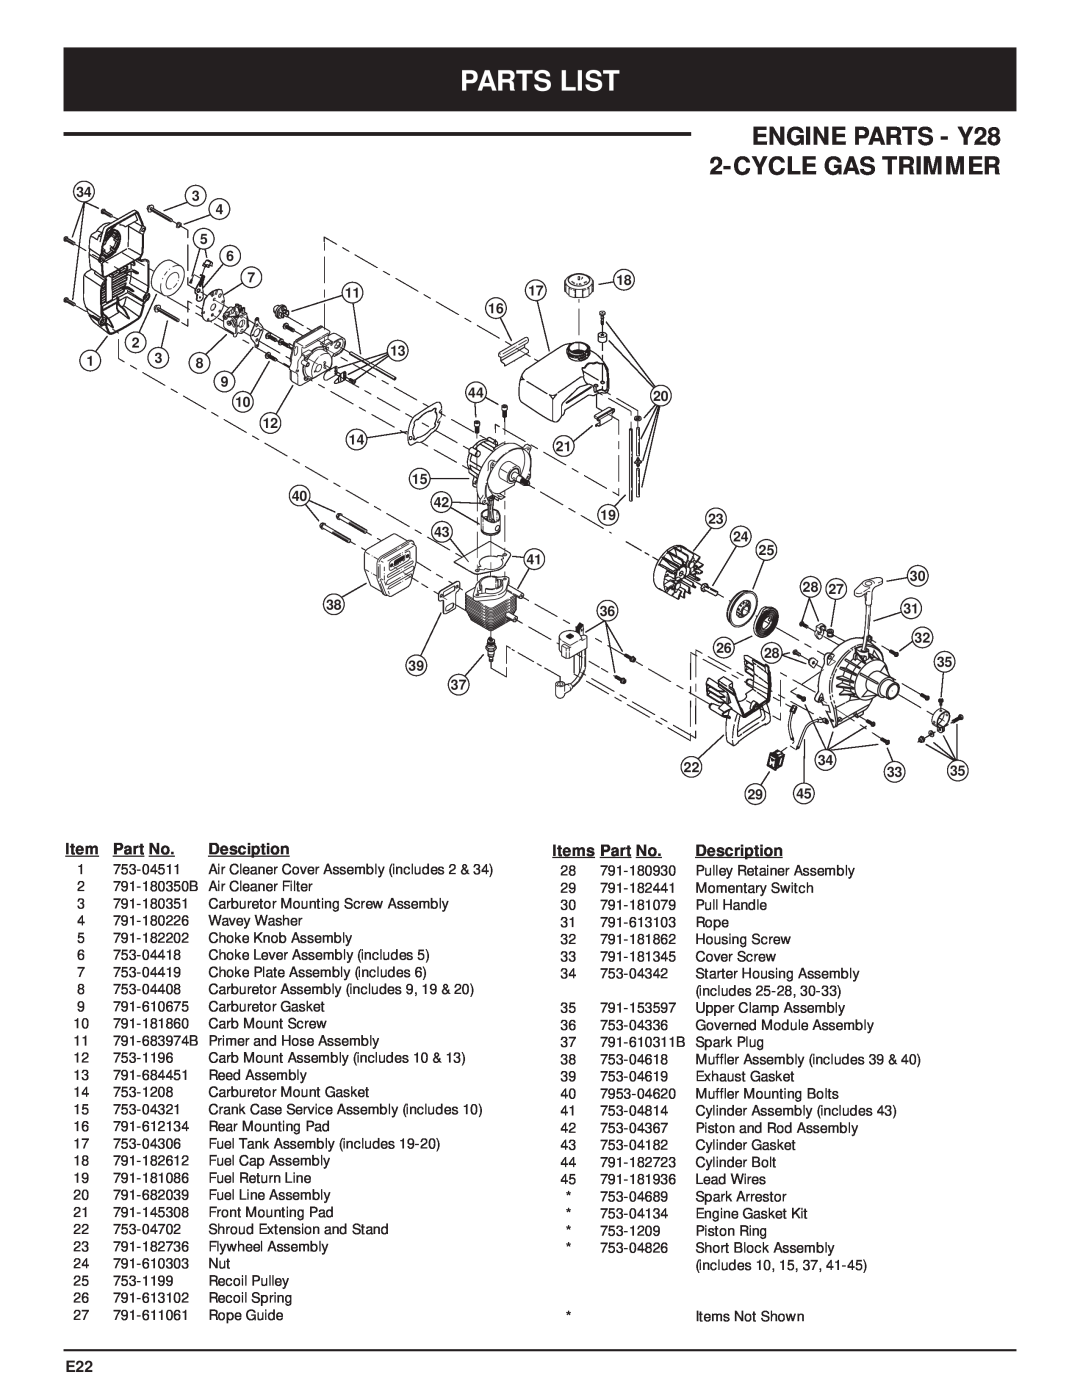 MTD manual Parts List, ENGINE PARTS - Y28 2-CYCLE GAS TRIMMER, 1117, 2234 